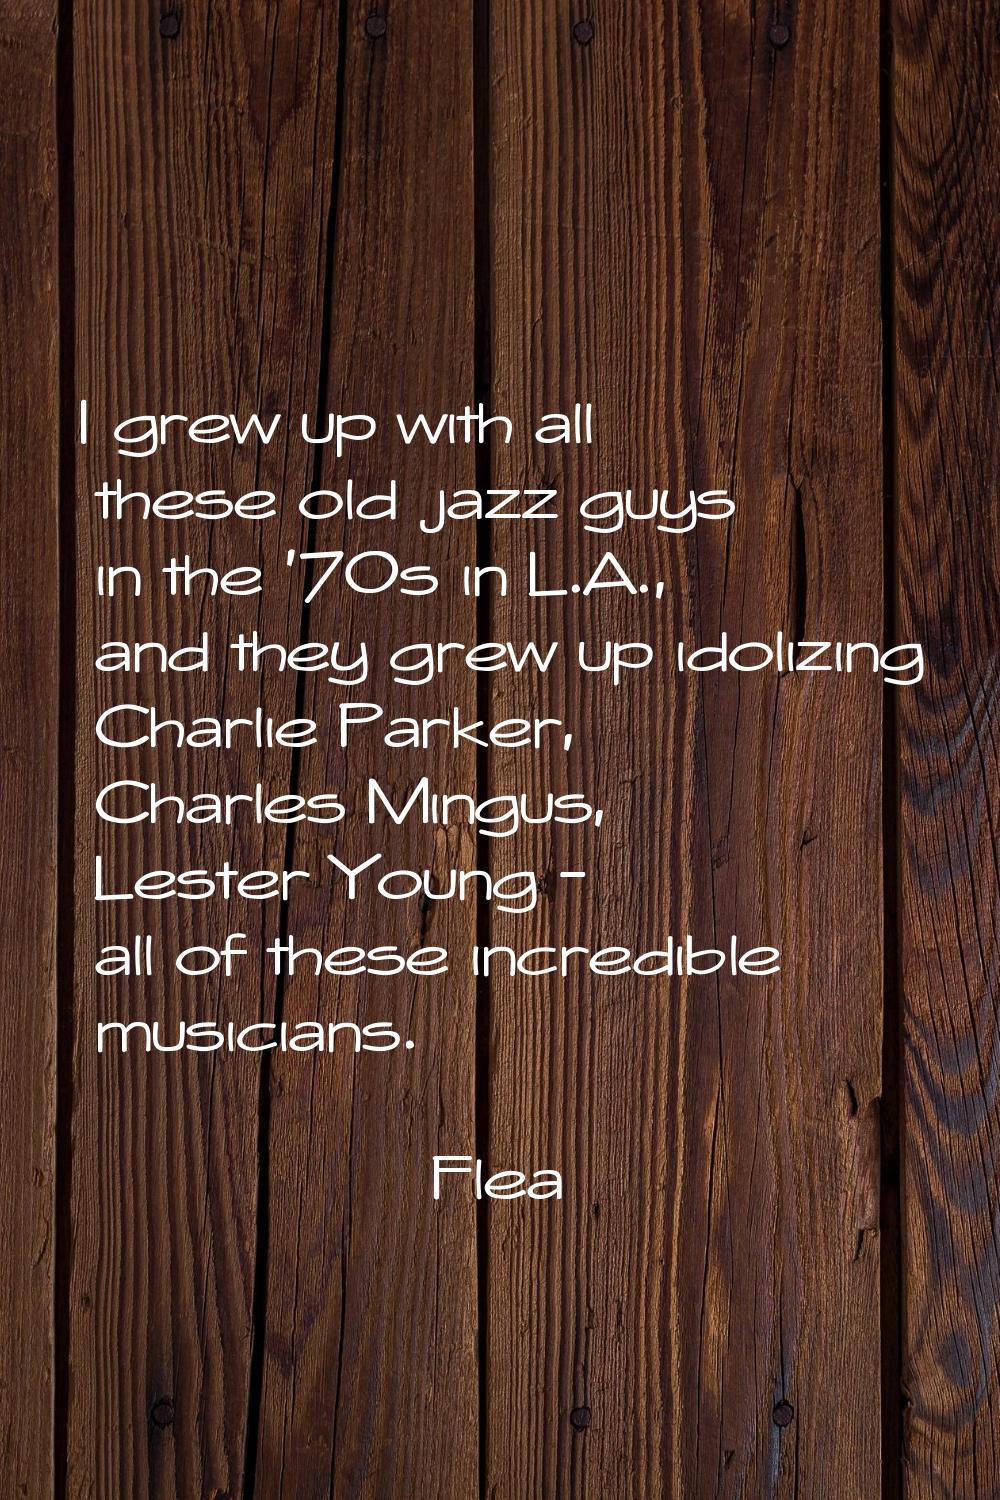 I grew up with all these old jazz guys in the '70s in L.A., and they grew up idolizing Charlie Park